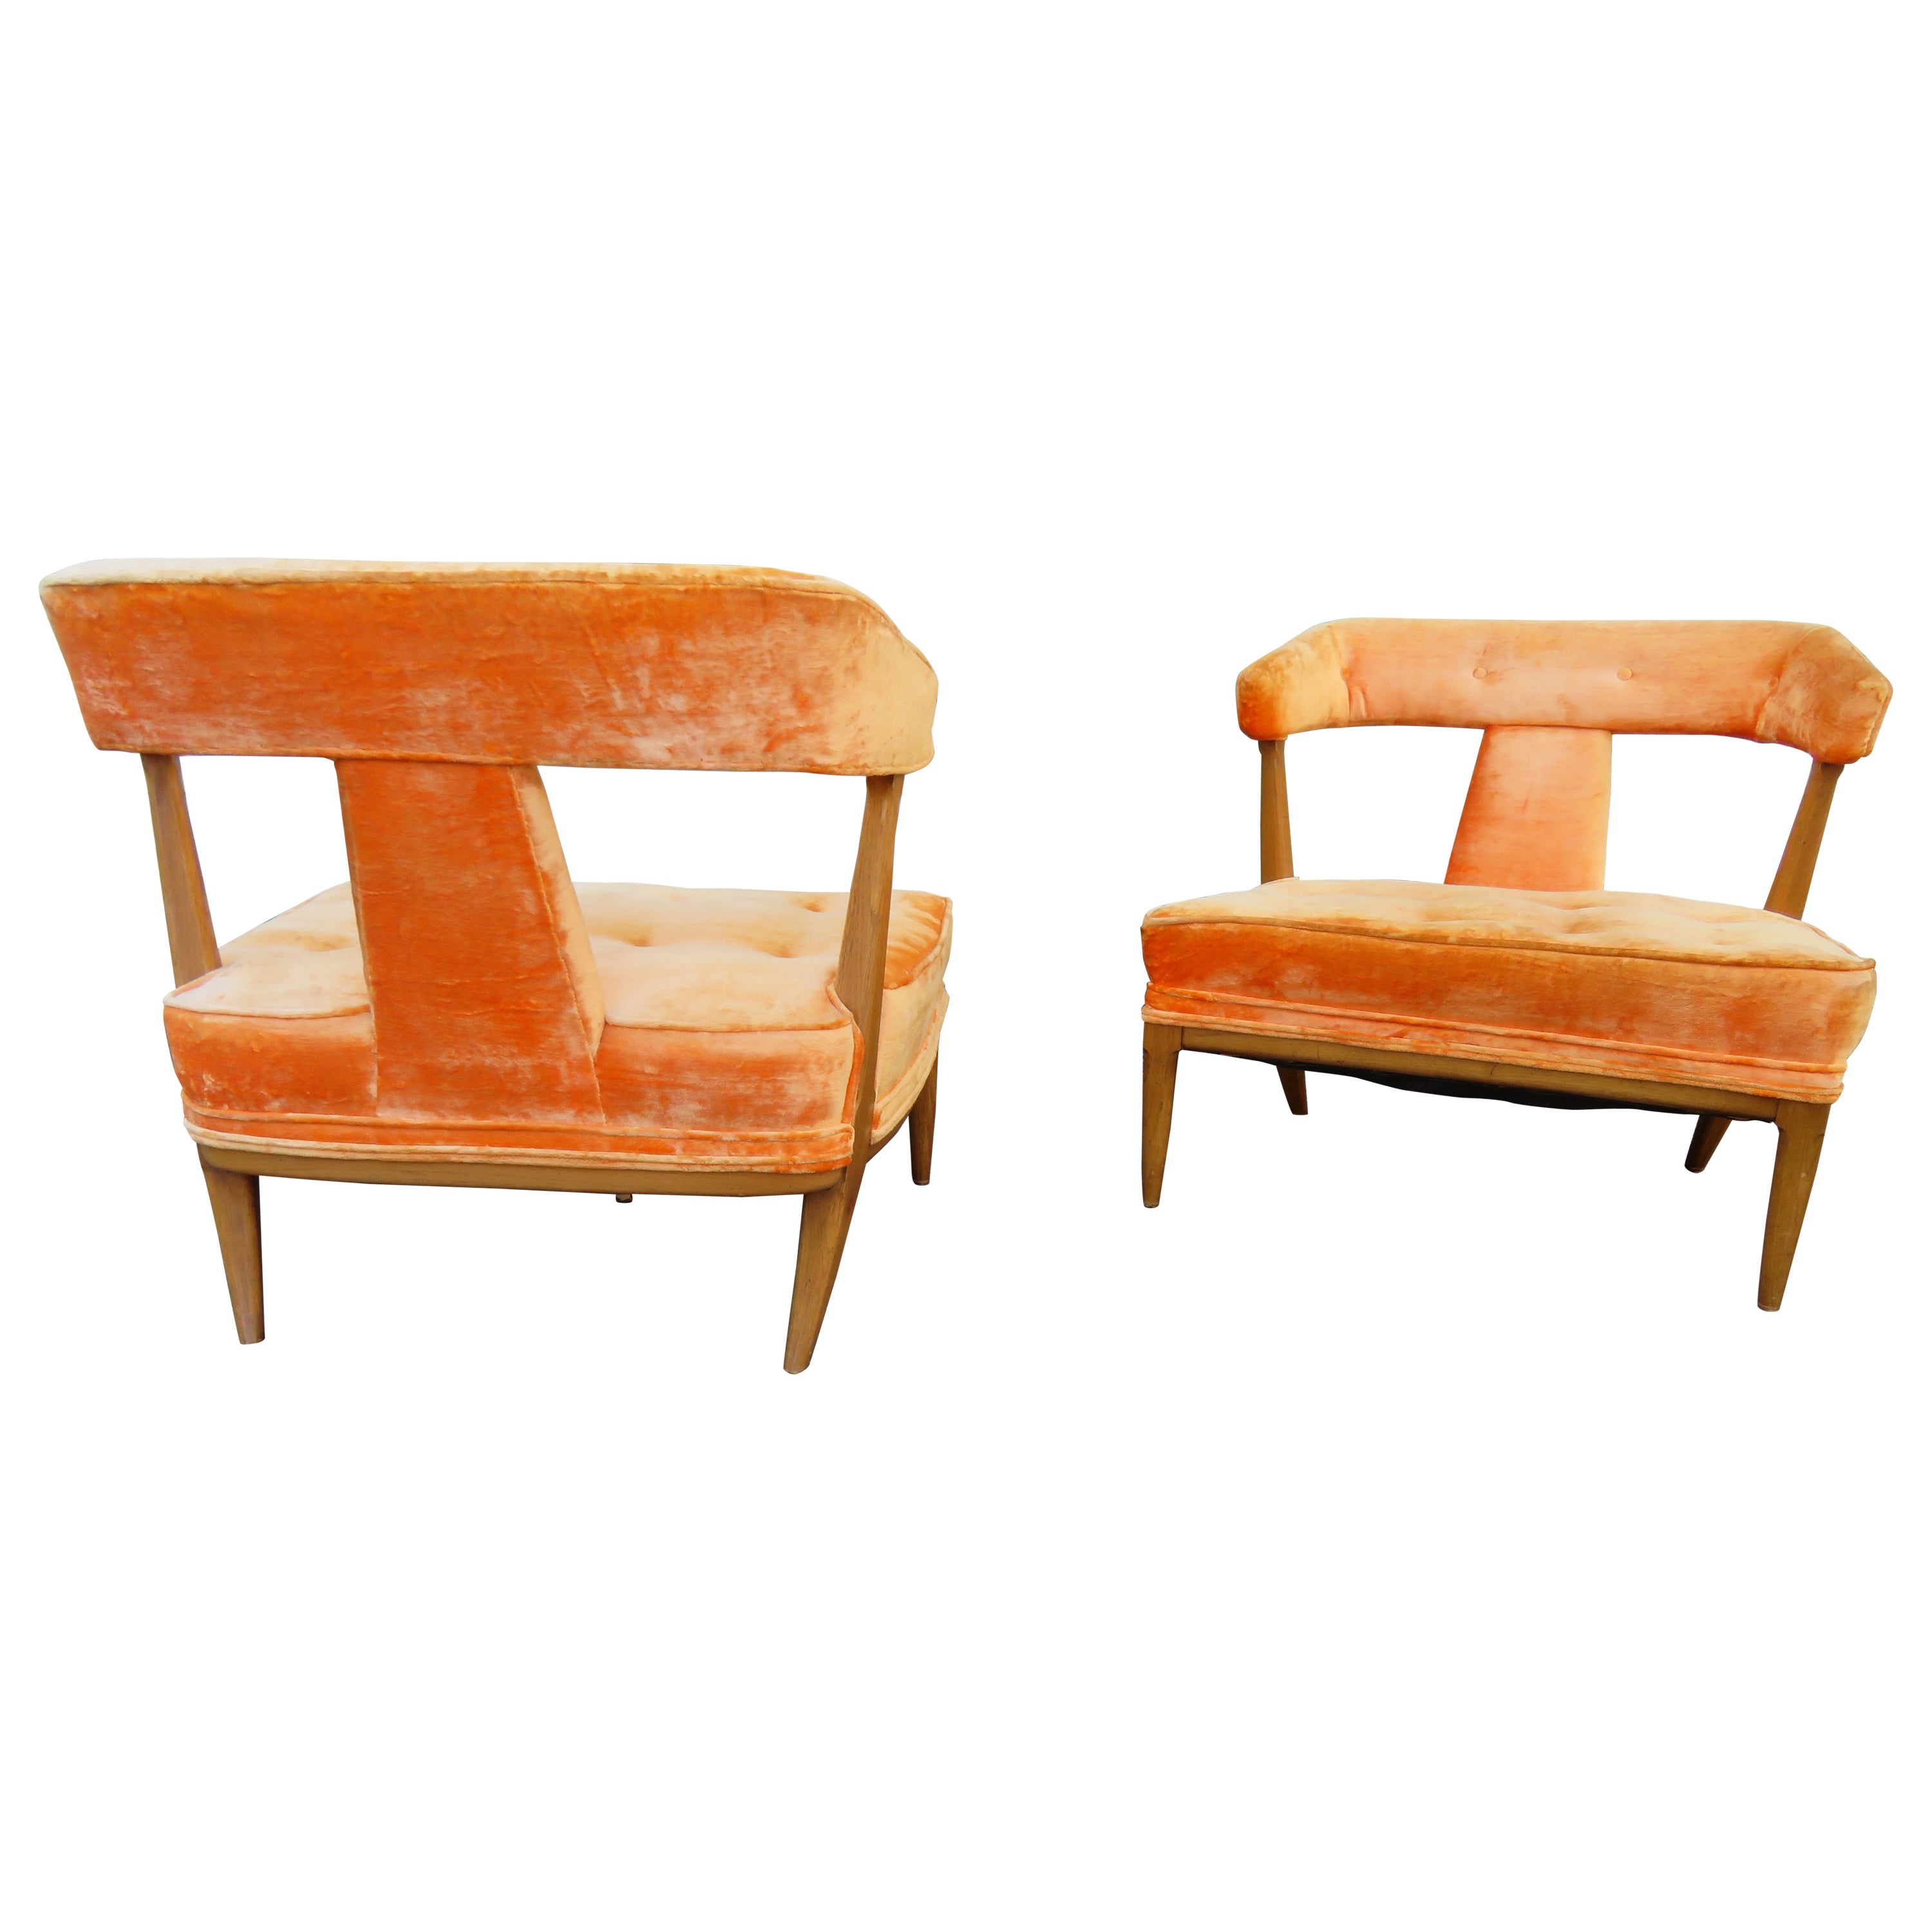 Gorgeous Pair Lubberts & Mulder Tomlinson Sophisticate Wide Seat Lounge Chairs For Sale